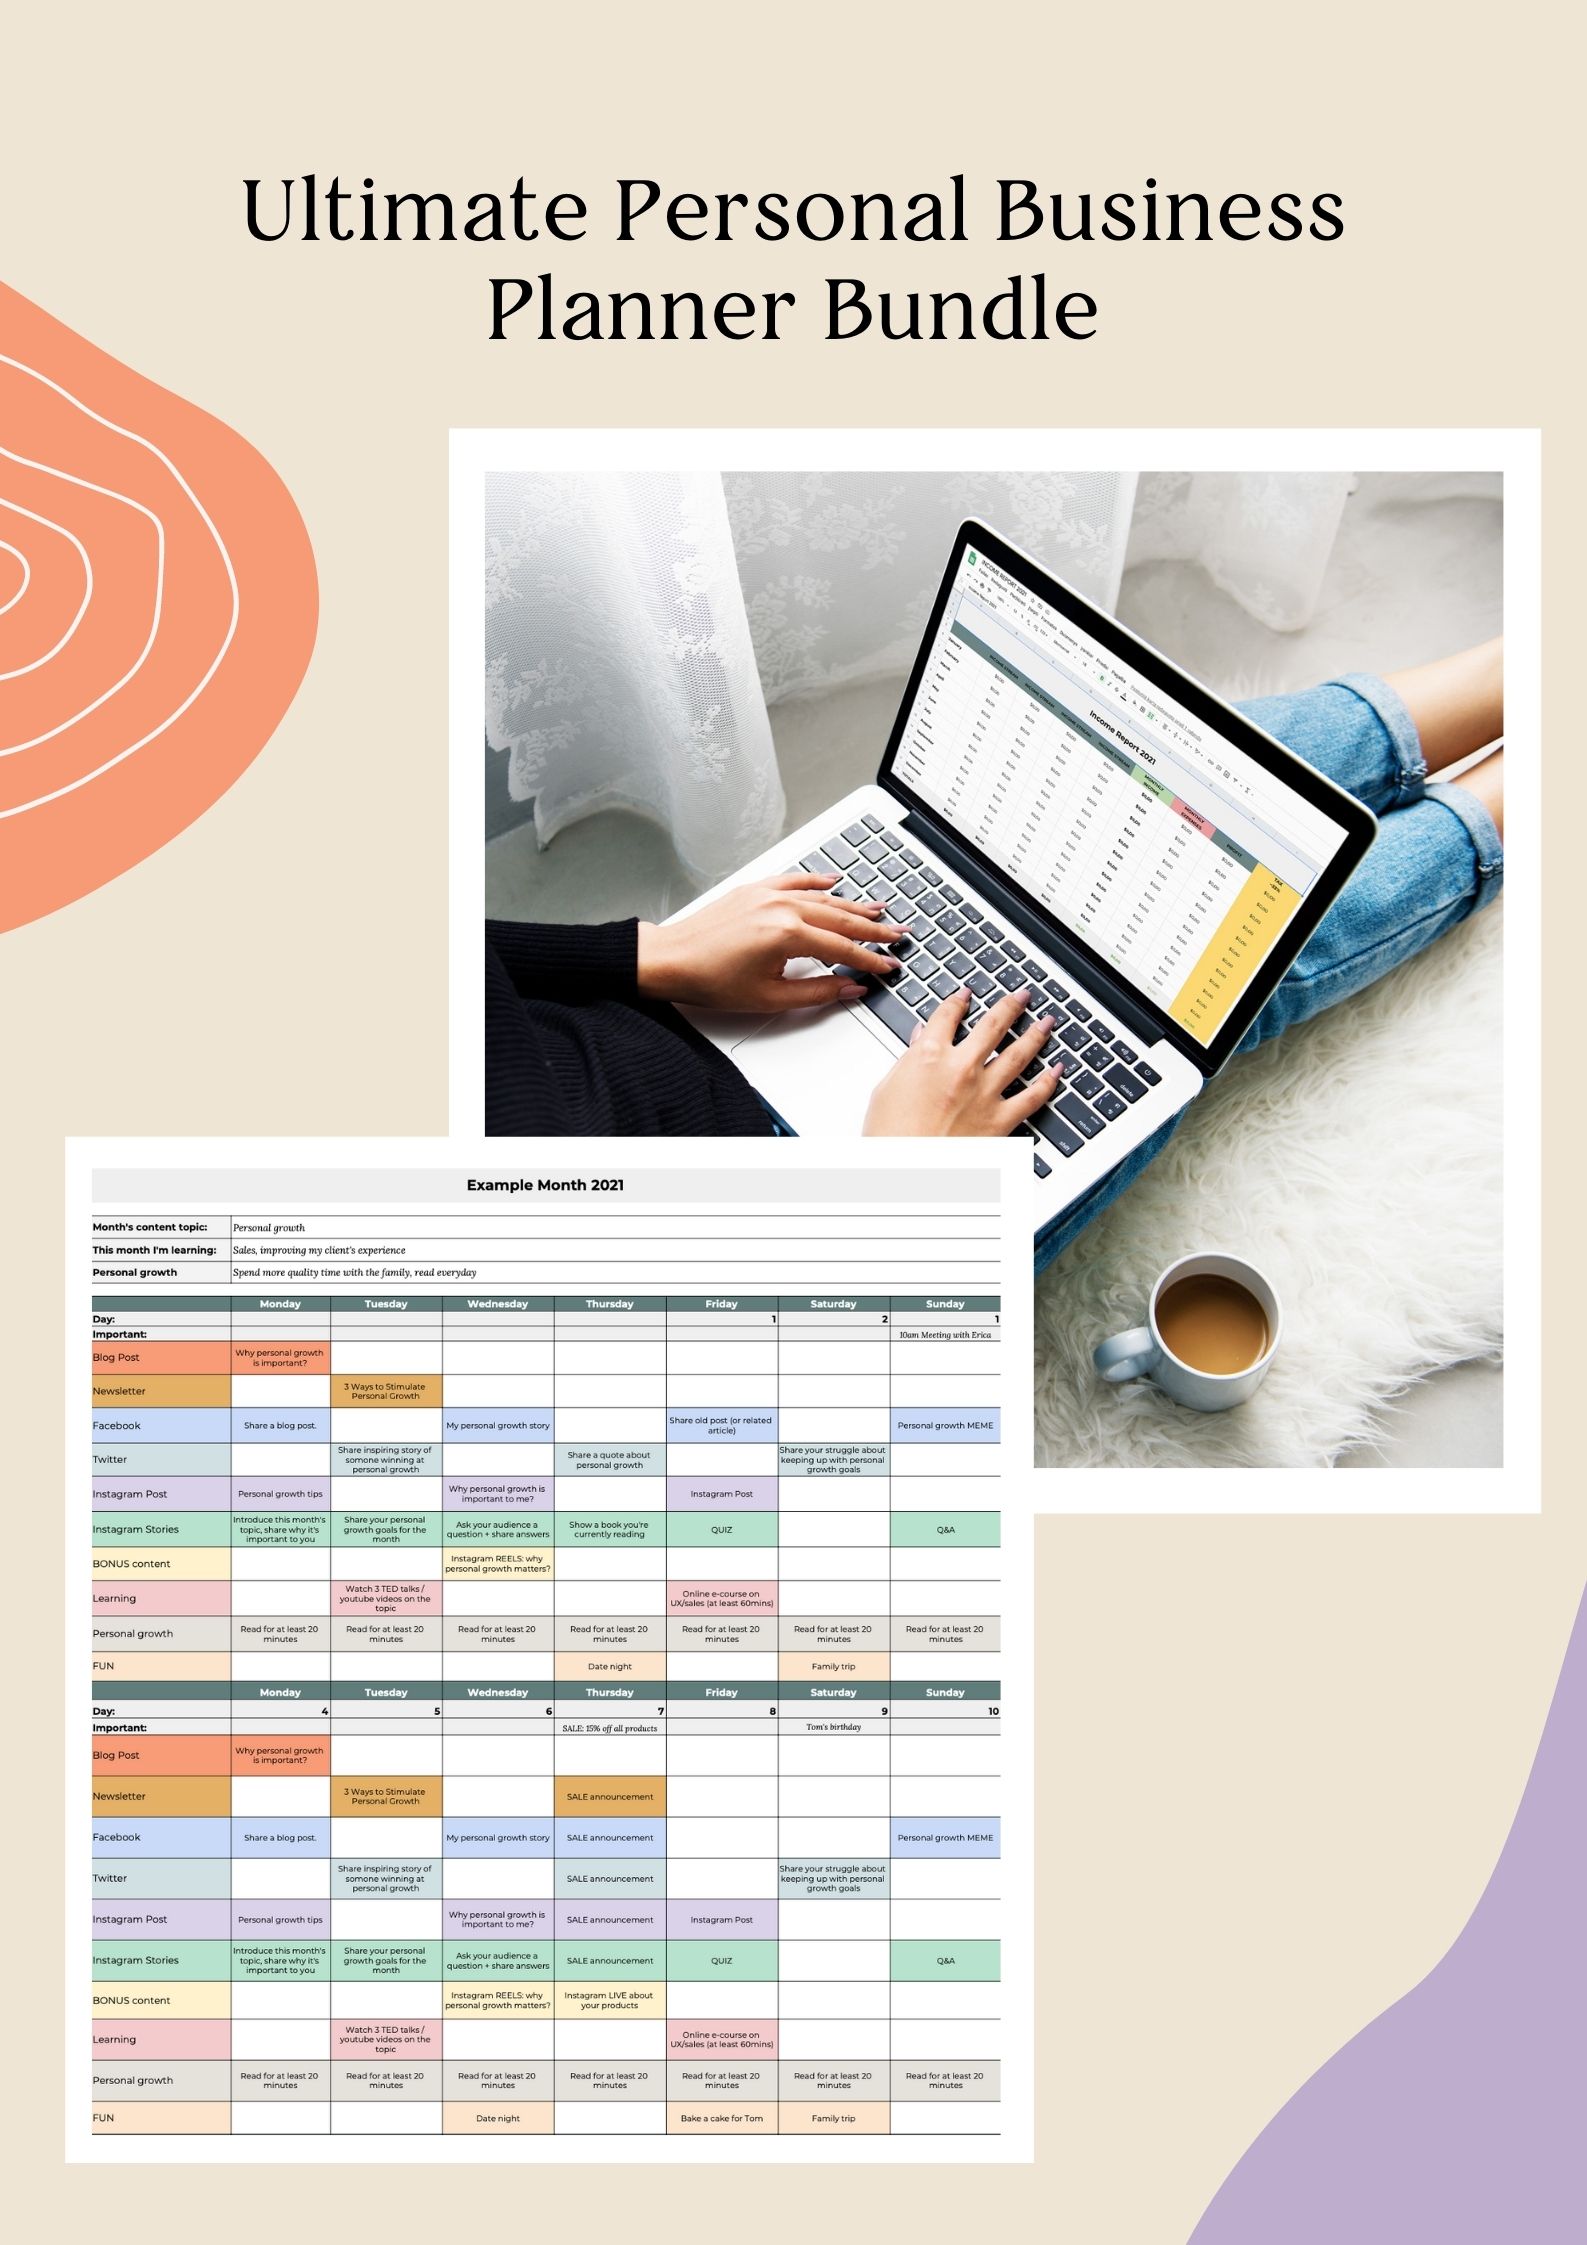 Ultimate Personal Business Planner Bundle